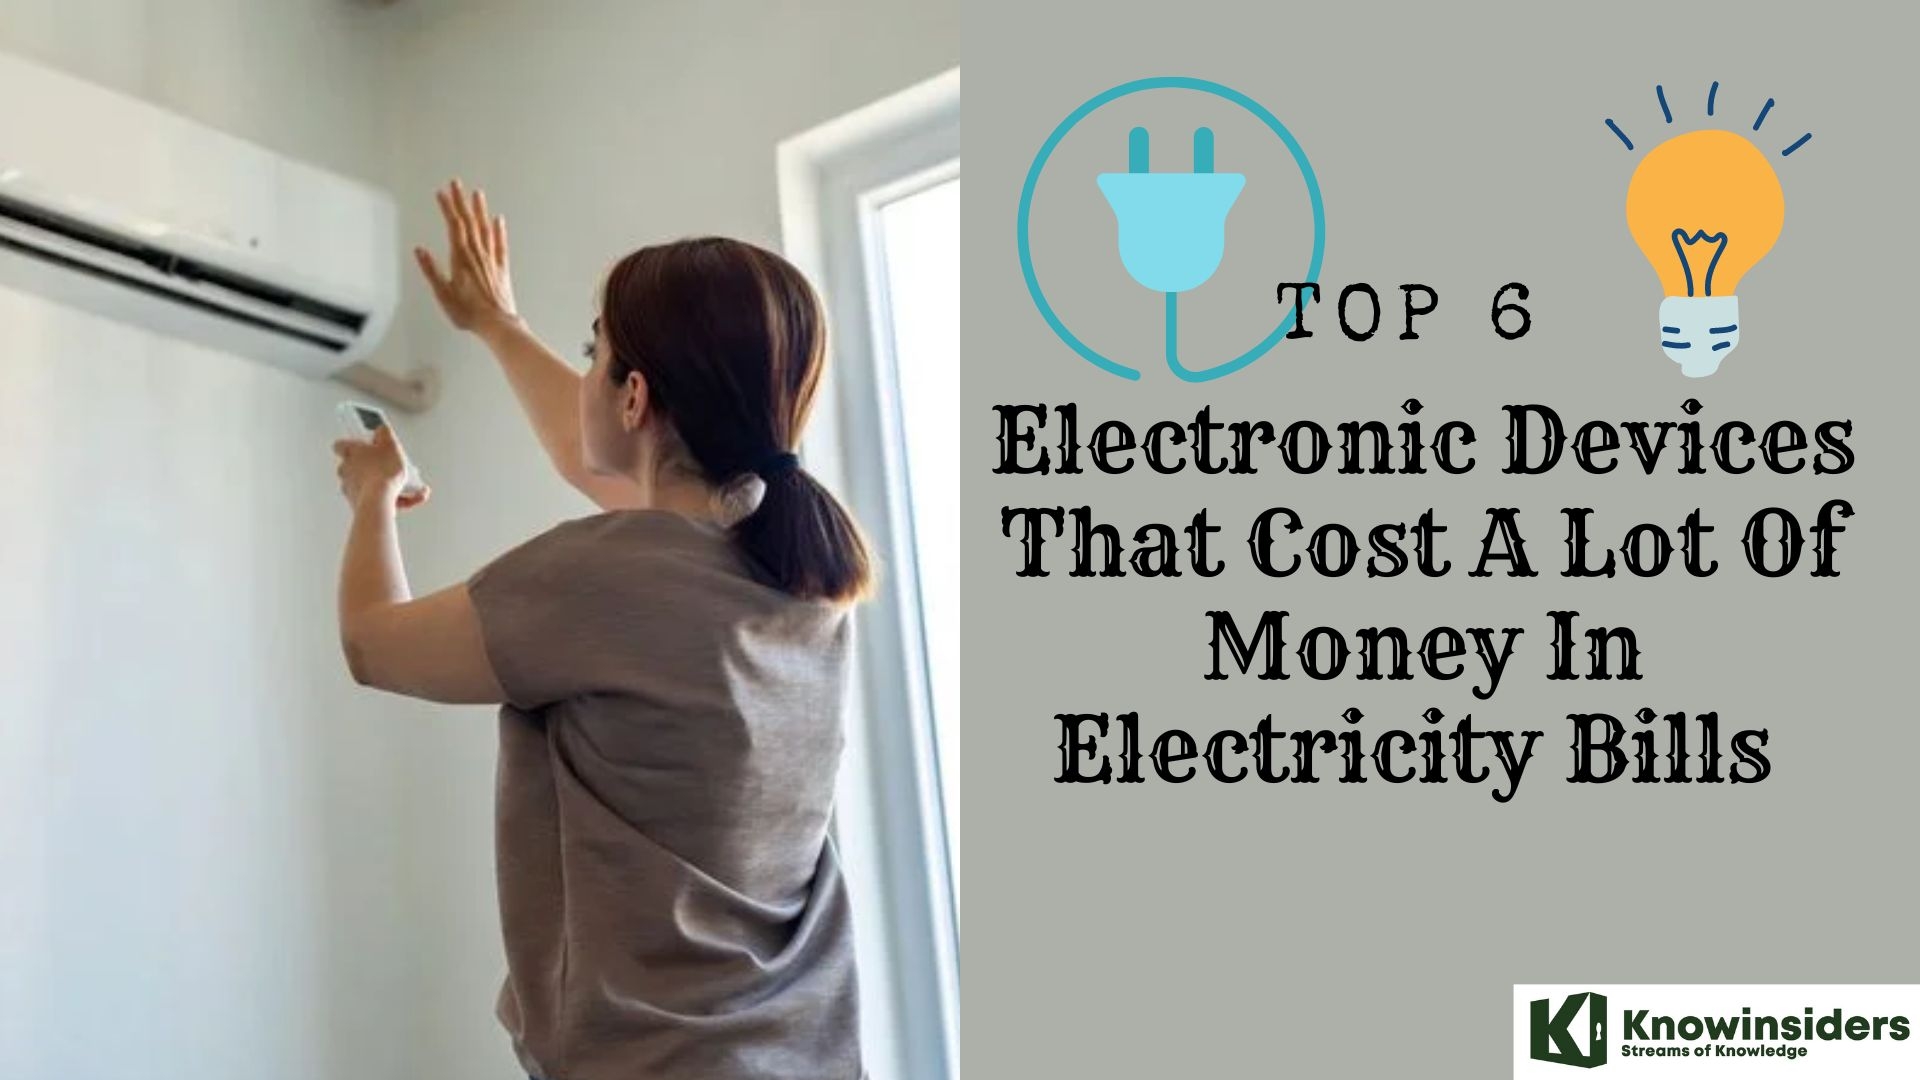 Top 6 Electronic Devices That Cost A Lot Of Money In Electricity Bills  Knowinsiders.com